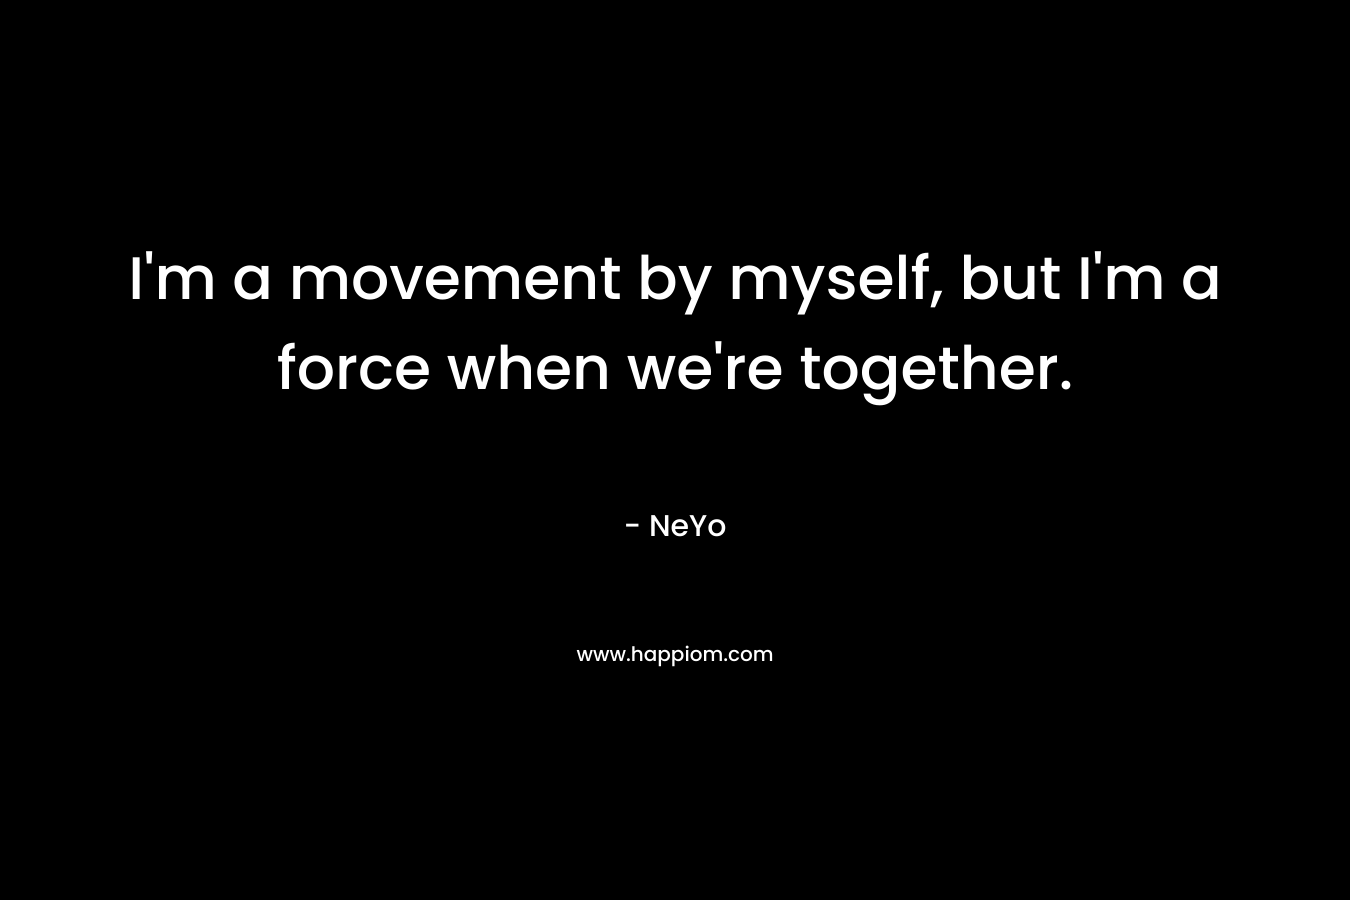 I’m a movement by myself, but I’m a force when we’re together. – NeYo